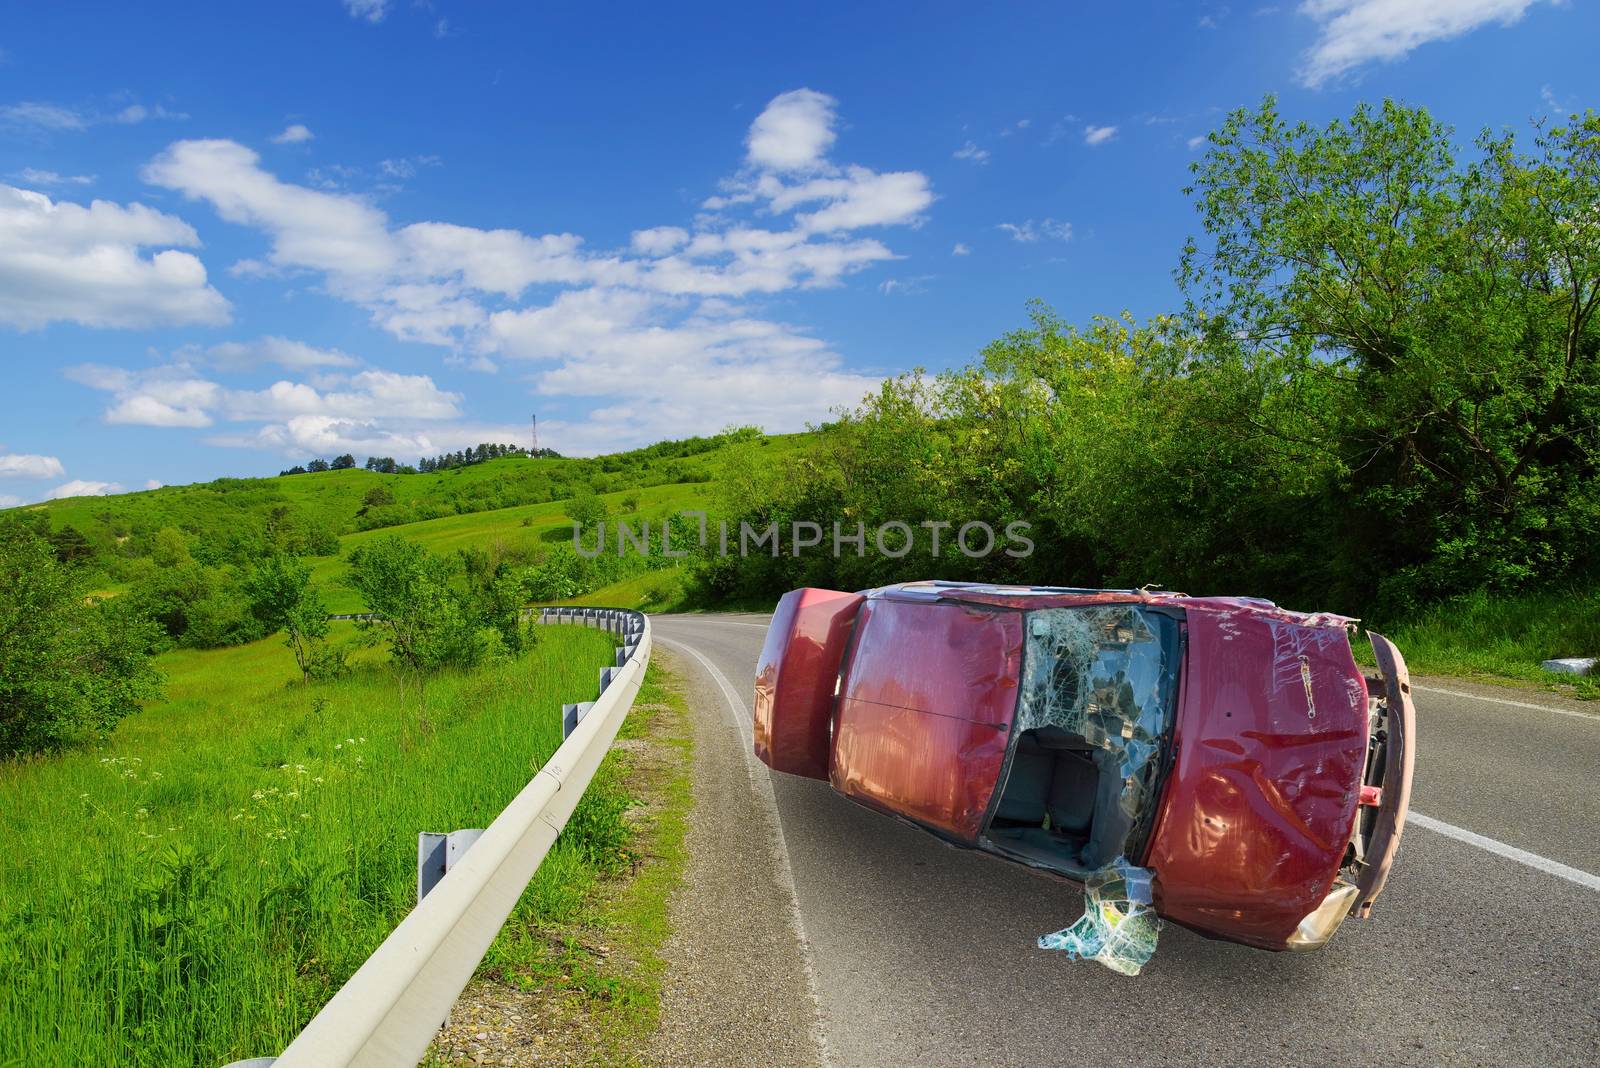 Car accident on curvy road by savcoco